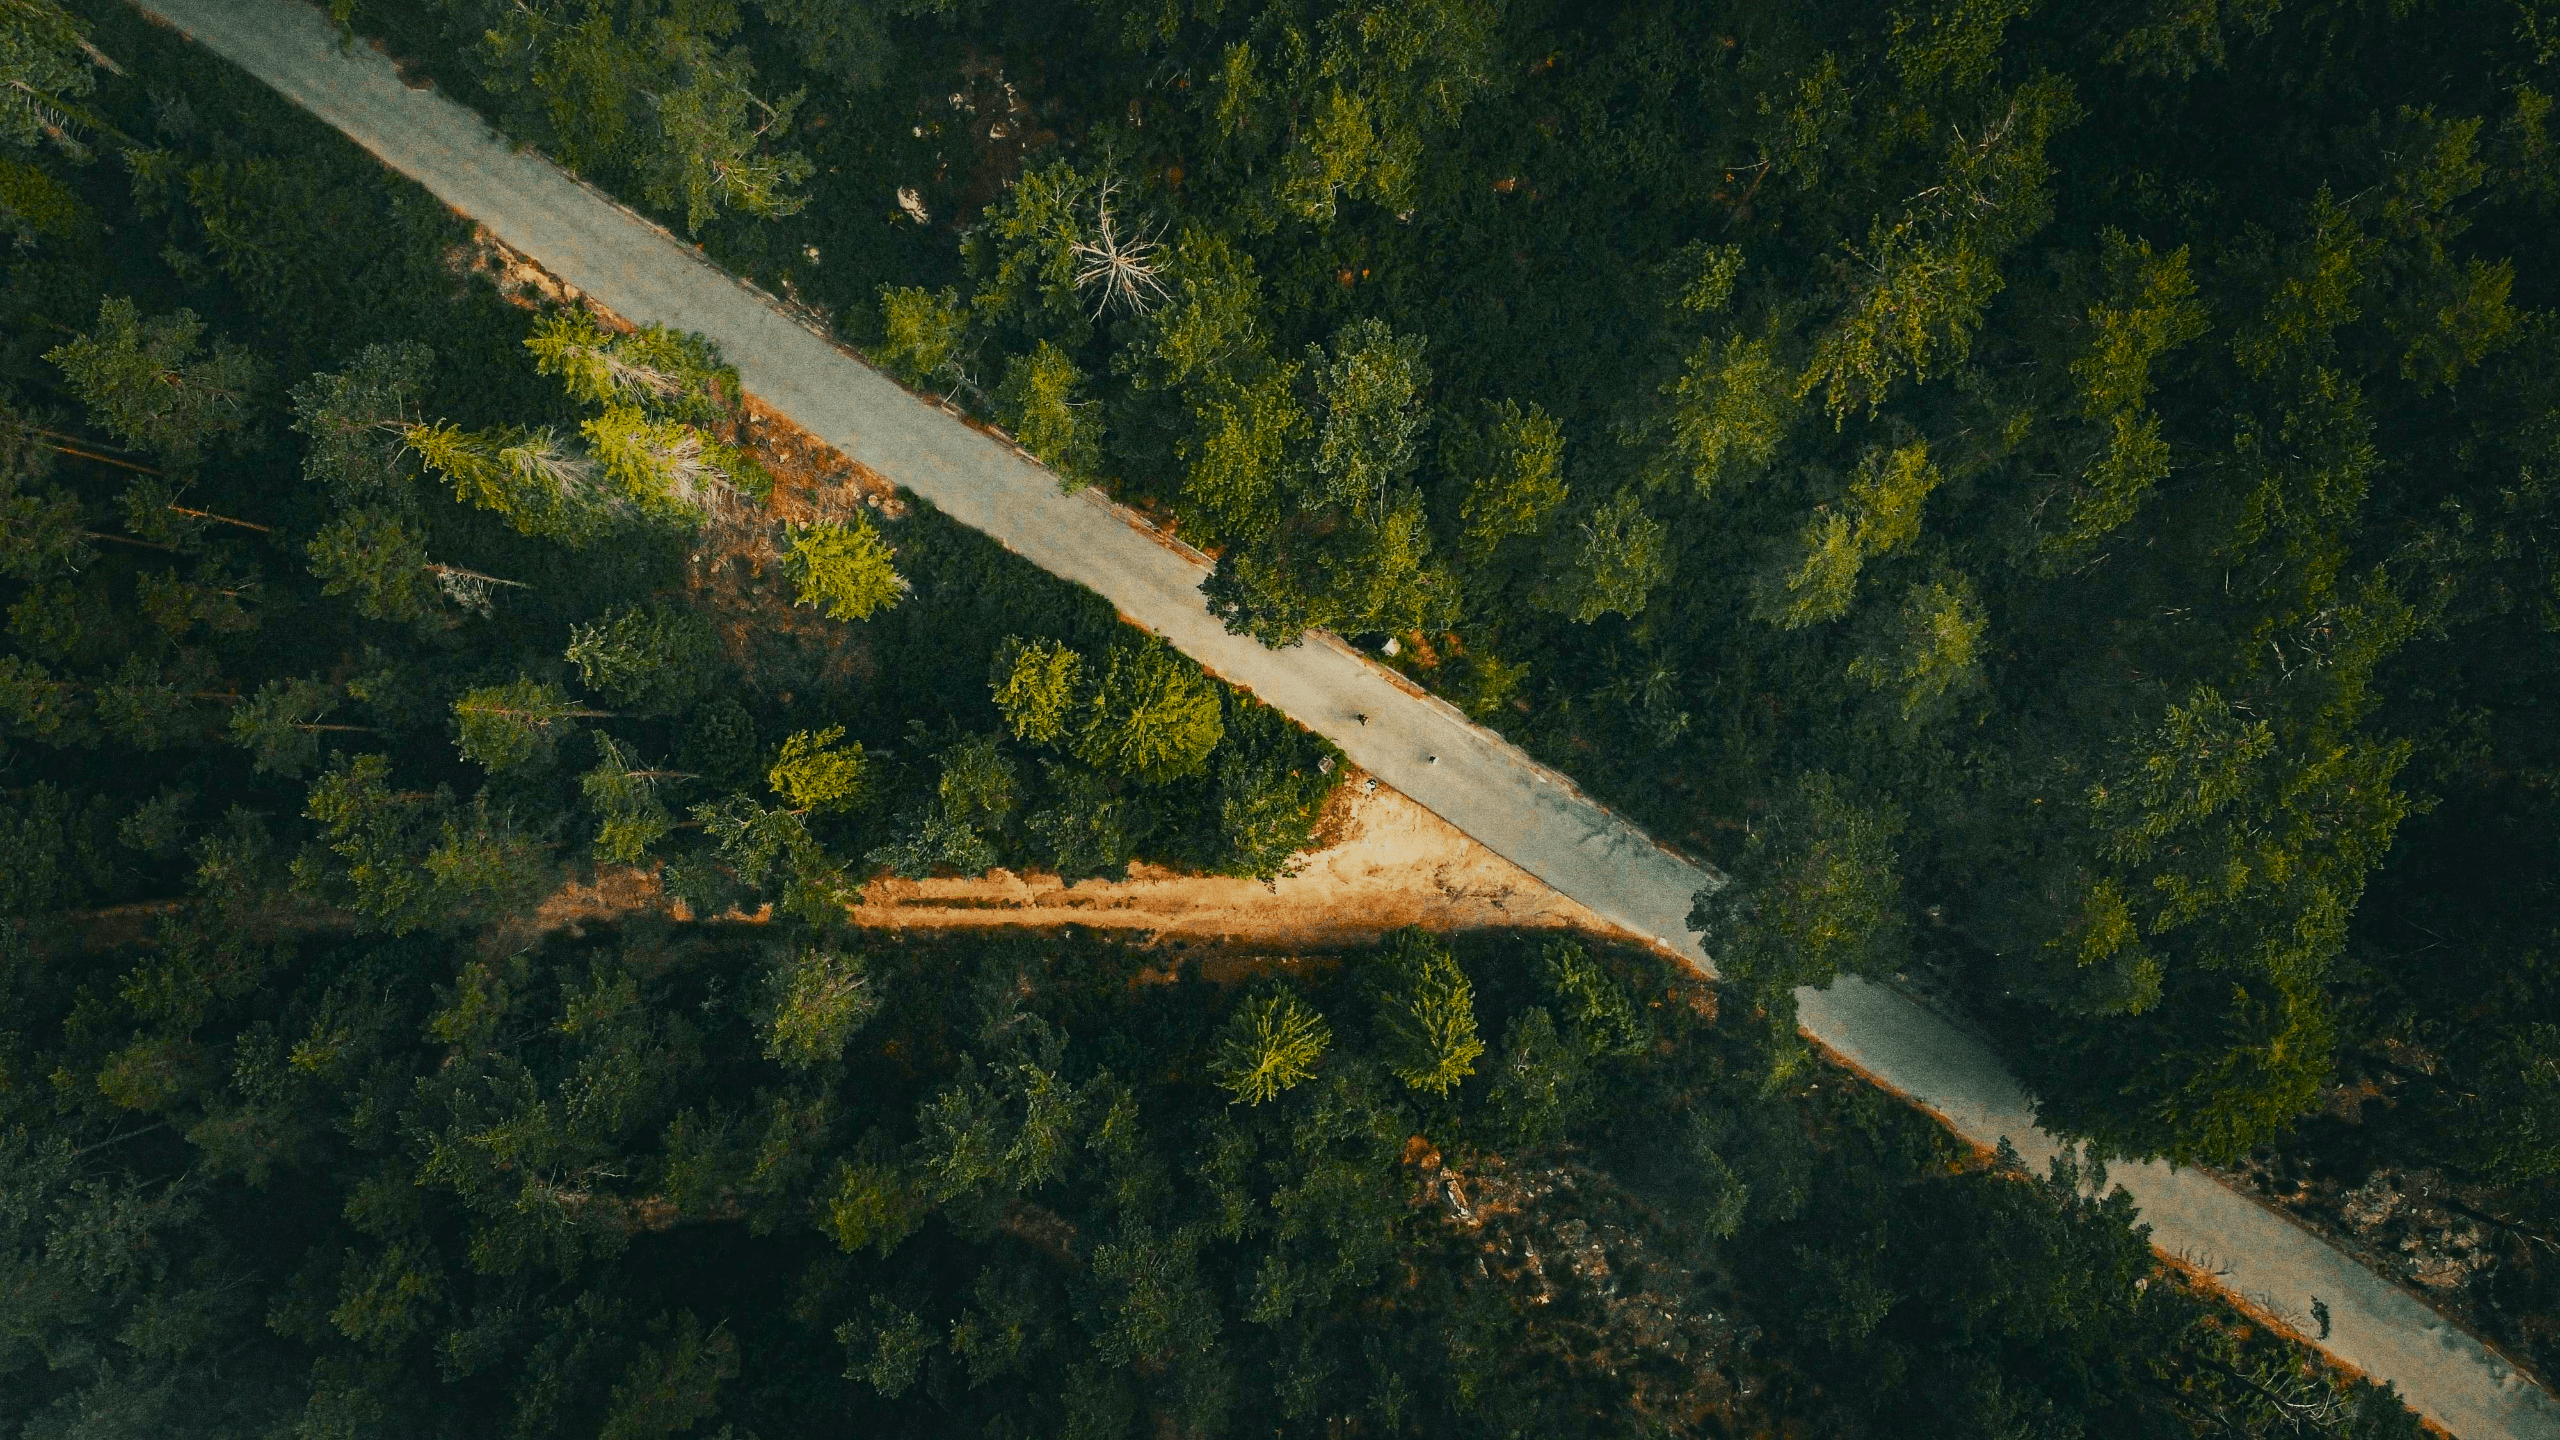 General 2560x1440 nature road path trees forest aerial view Portugal